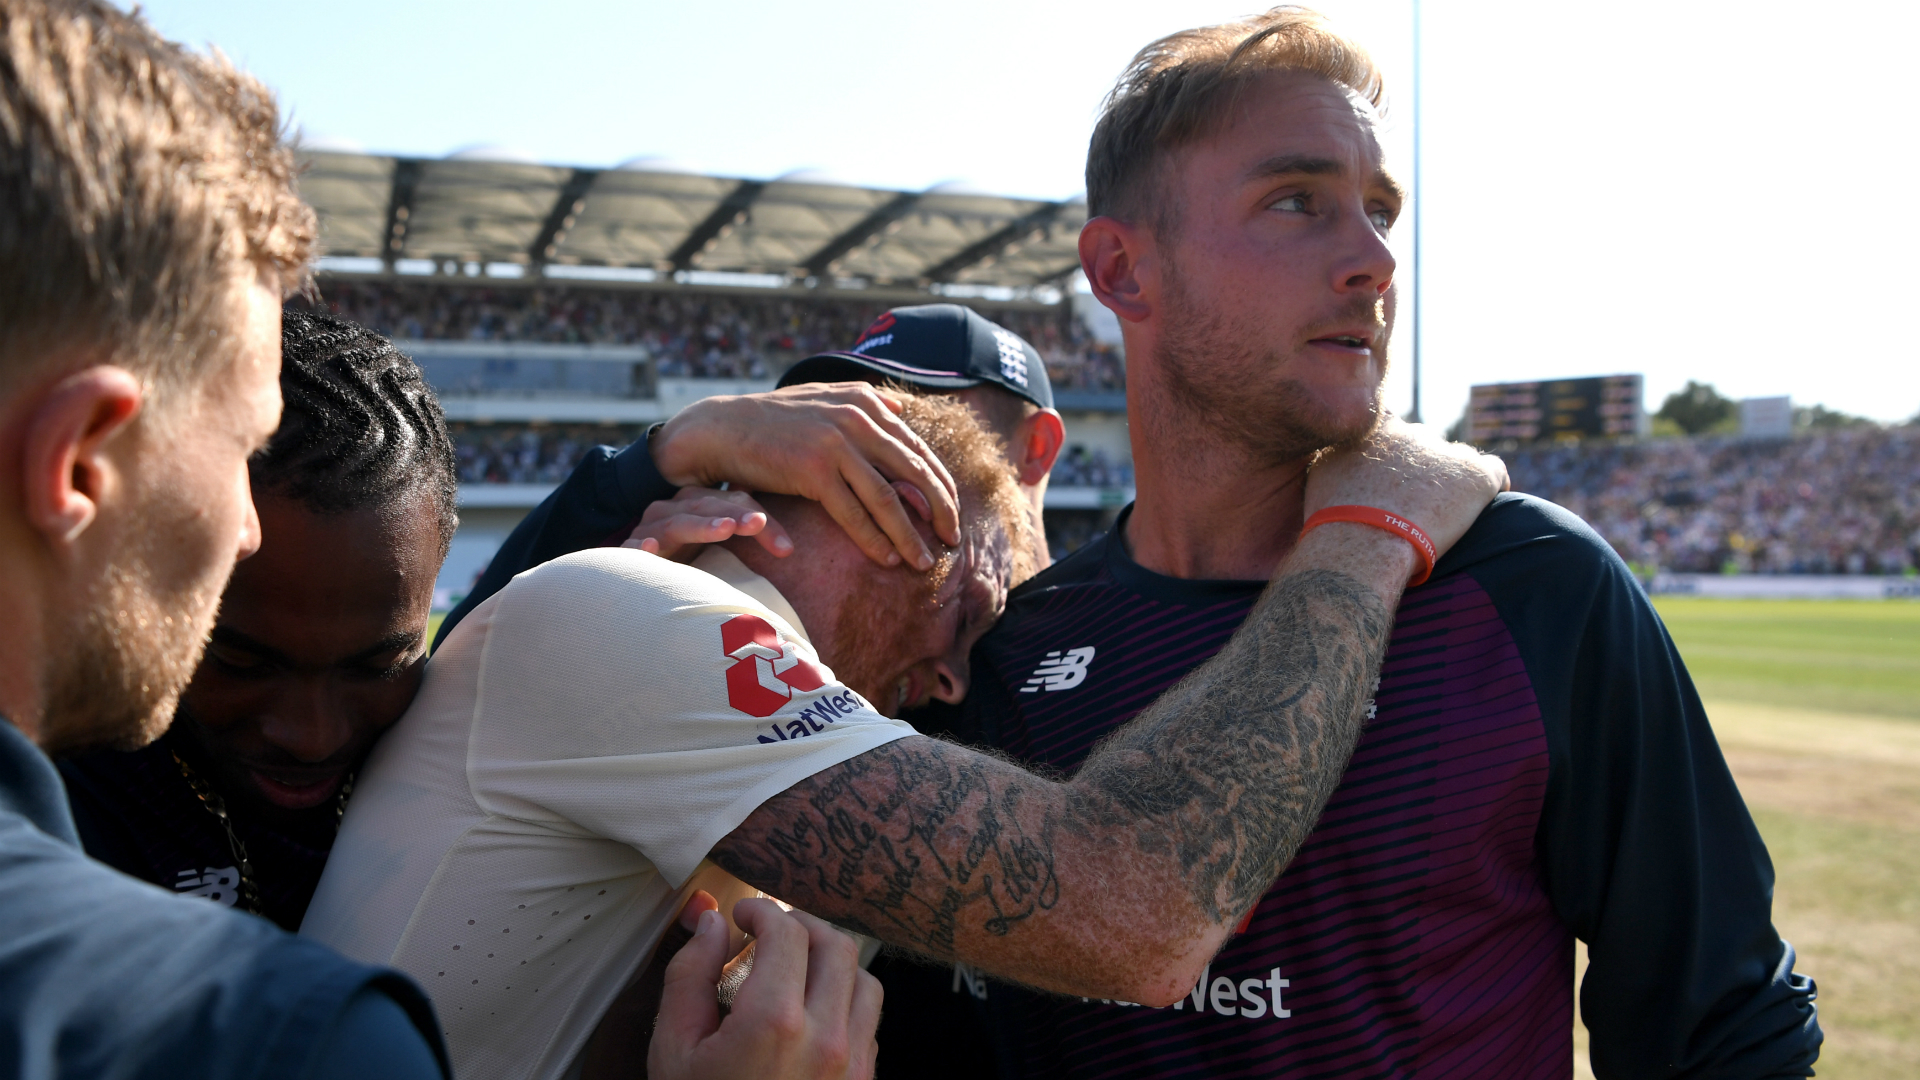 Stuart Broad could only watch on as Ben Stokes drew England level in the Ashes series, with the bowler full of praise for his team-mate.